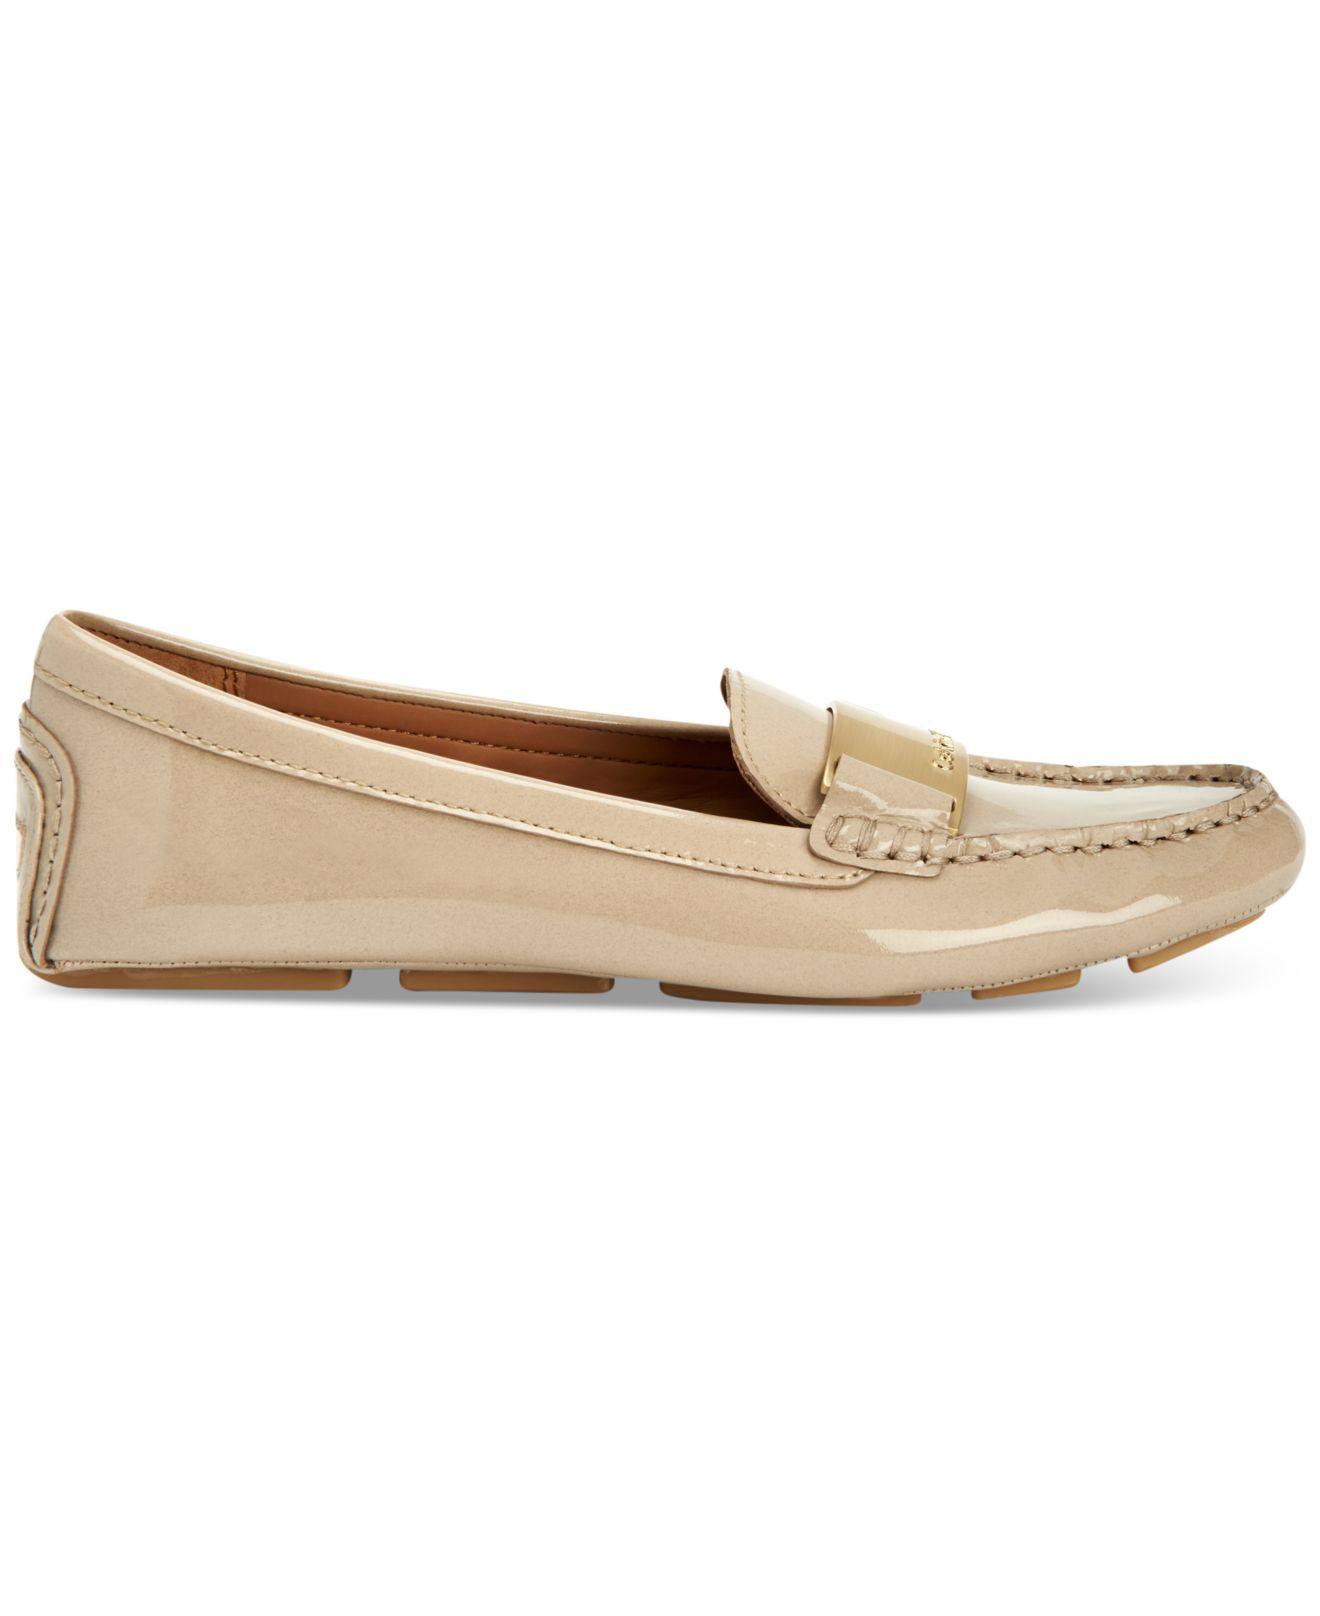 Calvin Klein Leather Women's Lisette Flats in Natural | Lyst